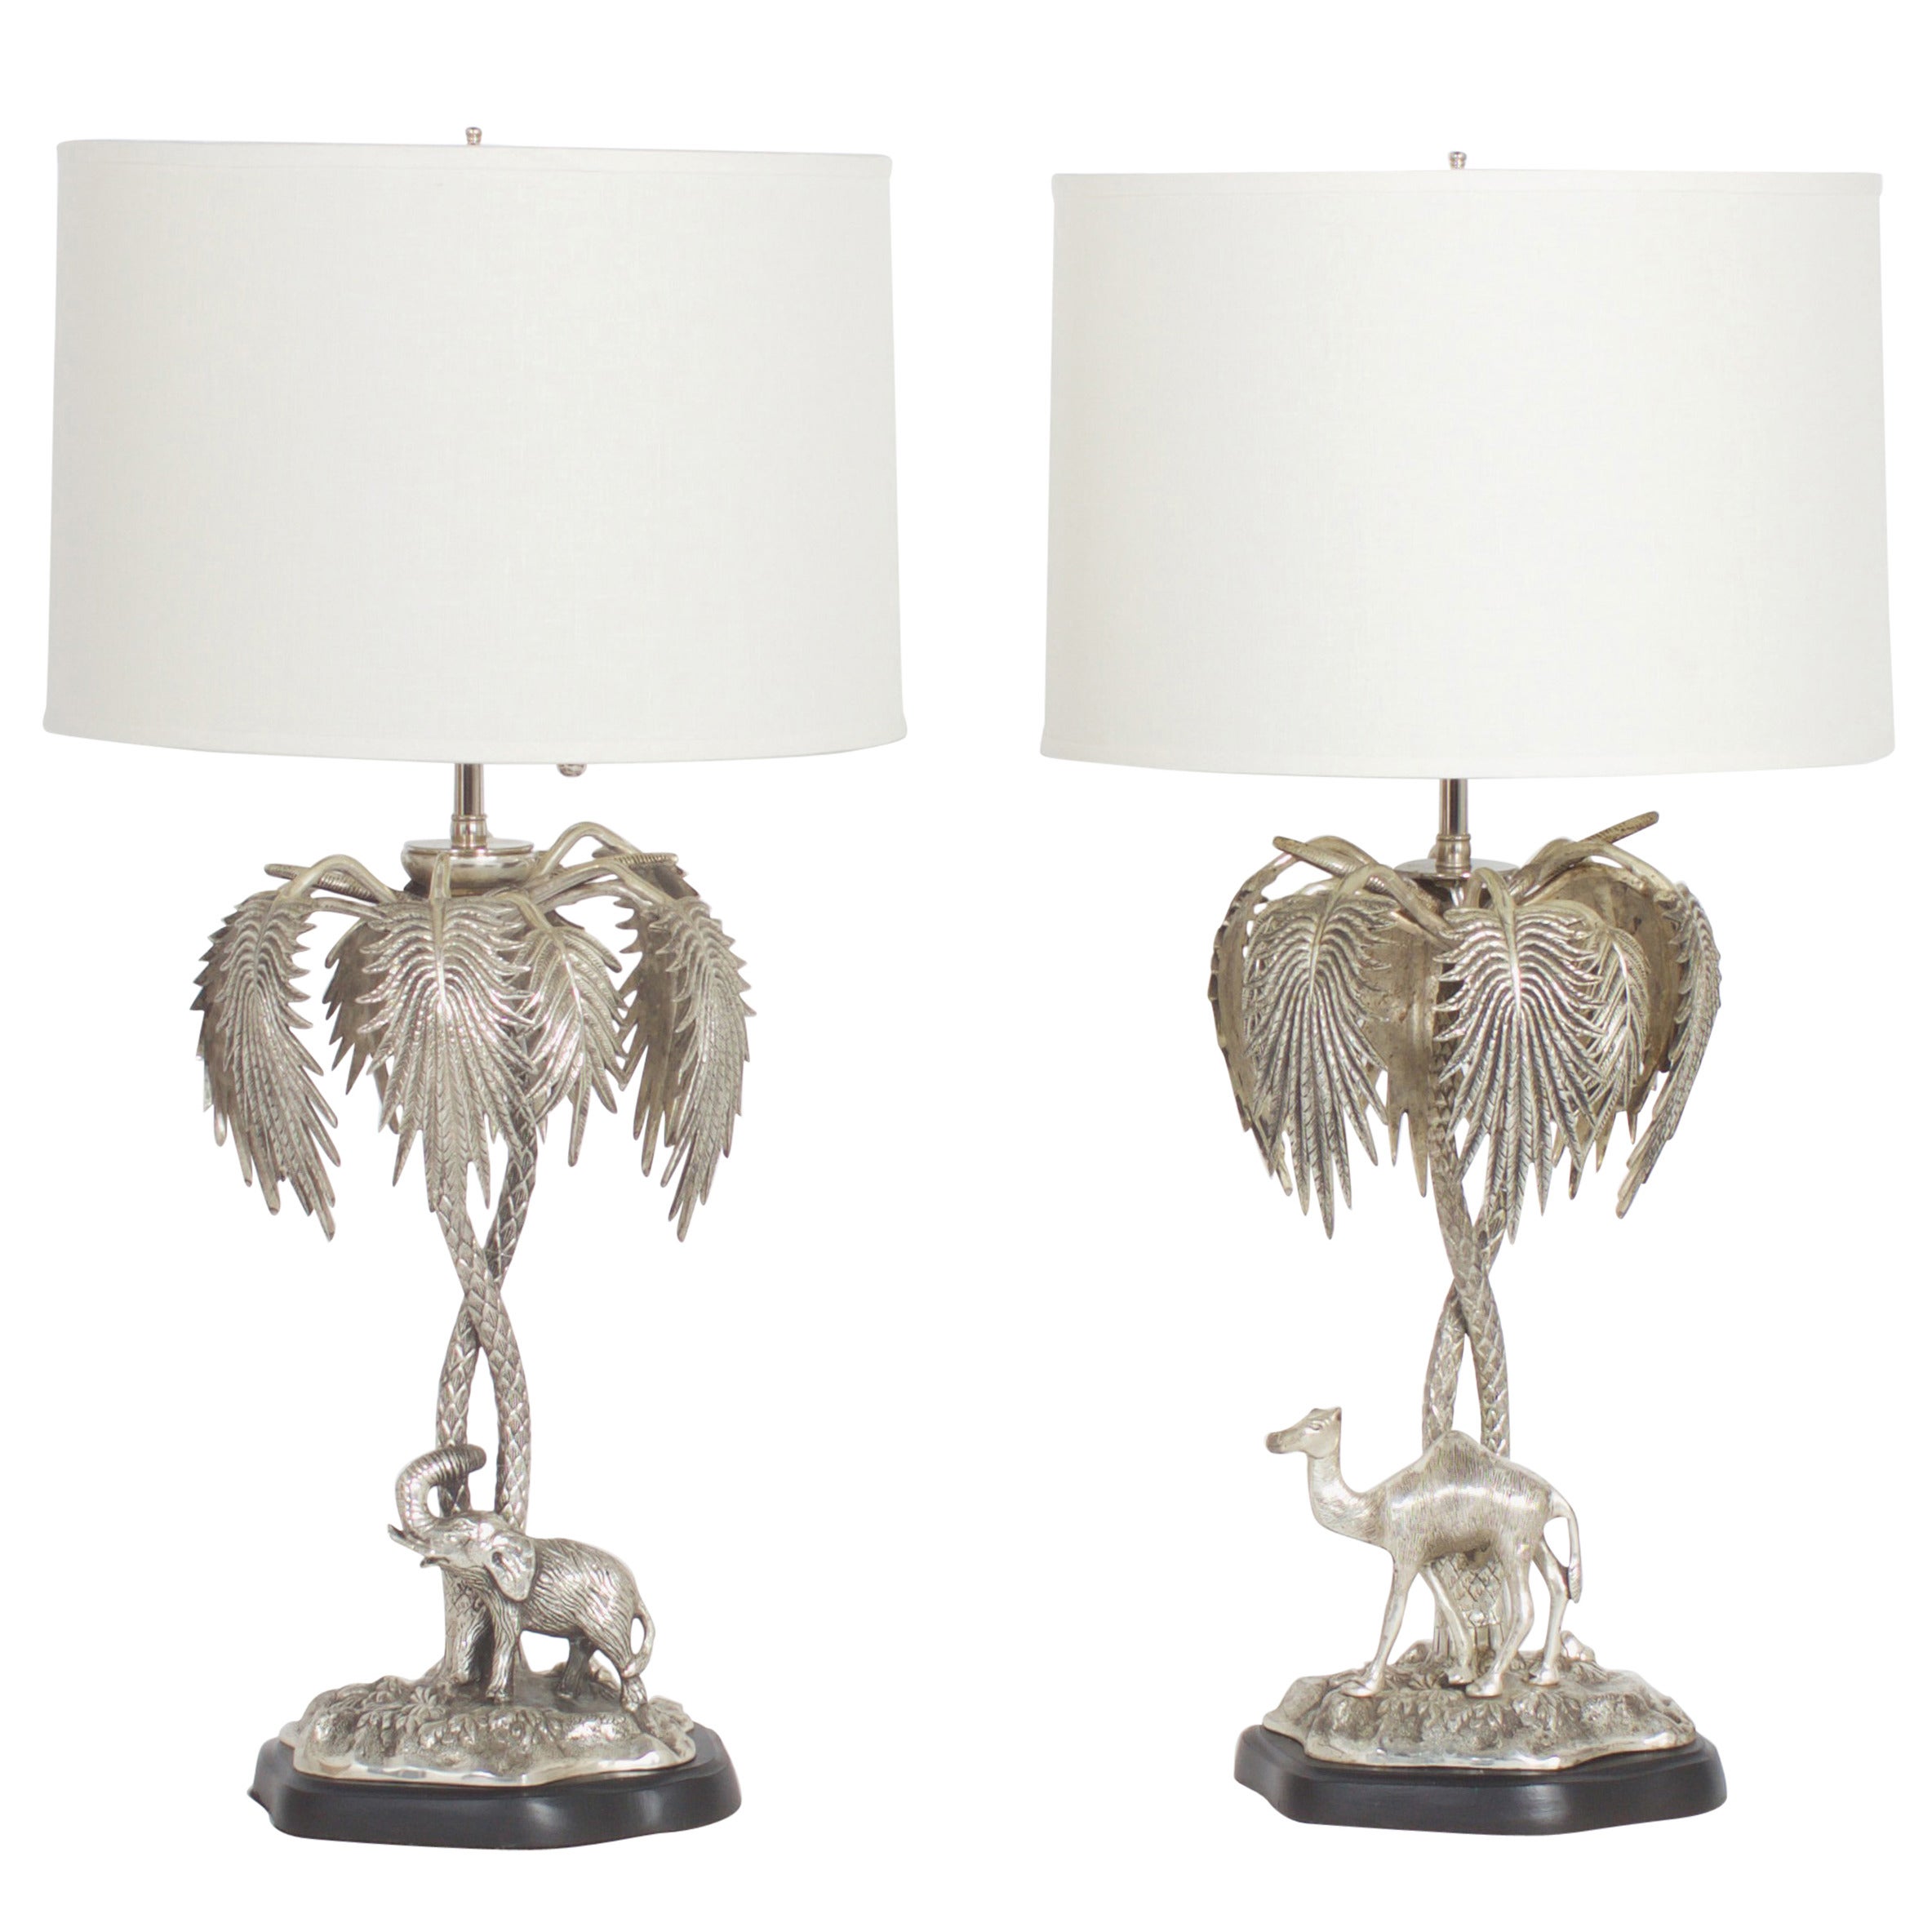 Pair of Silvered Metal Palm Tree Lamps with Camel and Elephant